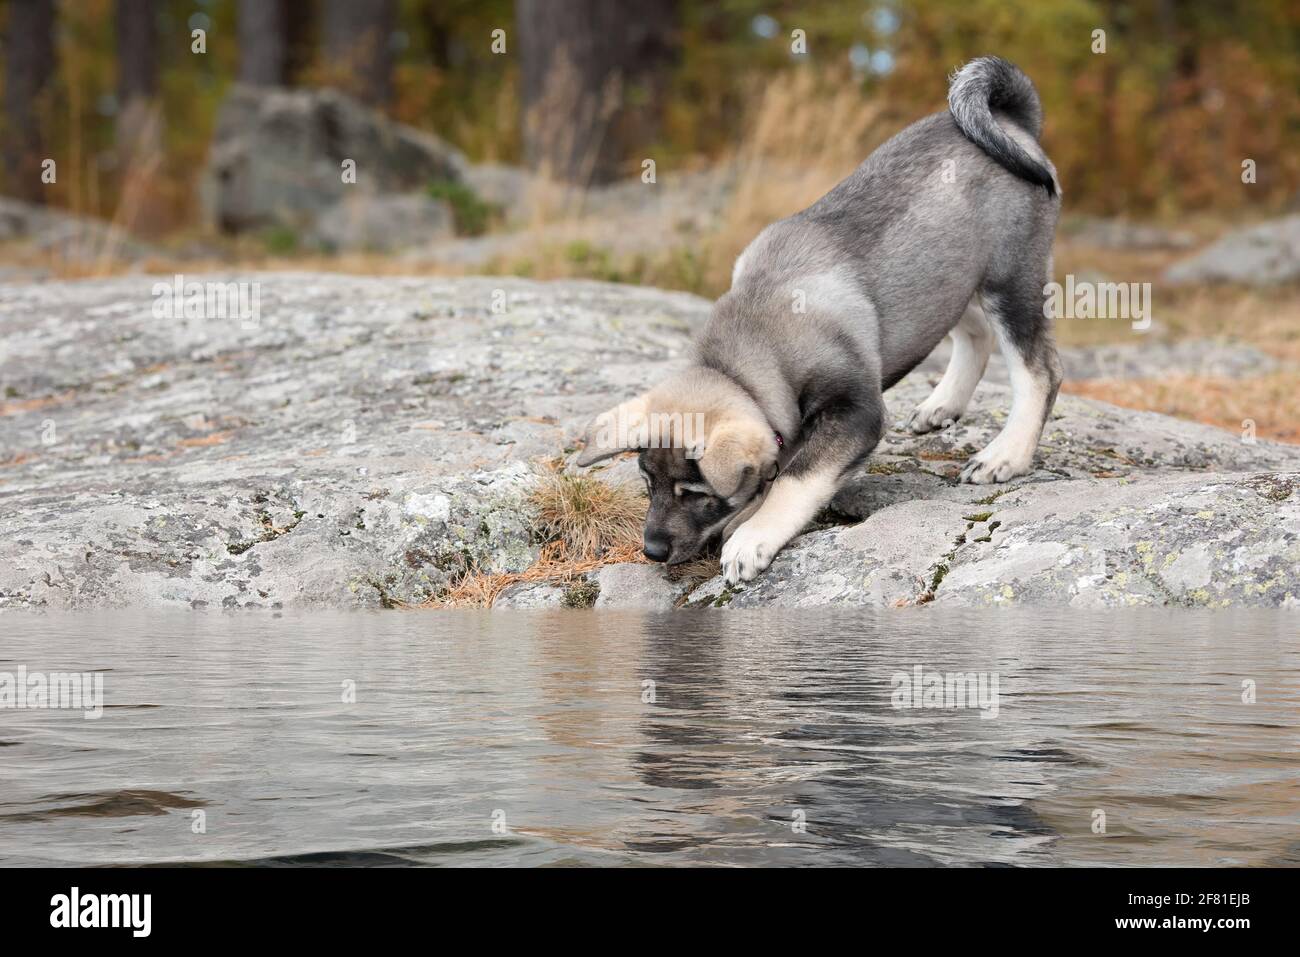 Shot of a curious Swedish Elkhound puppy suspiciously exploring the shoreline. Stock Photo